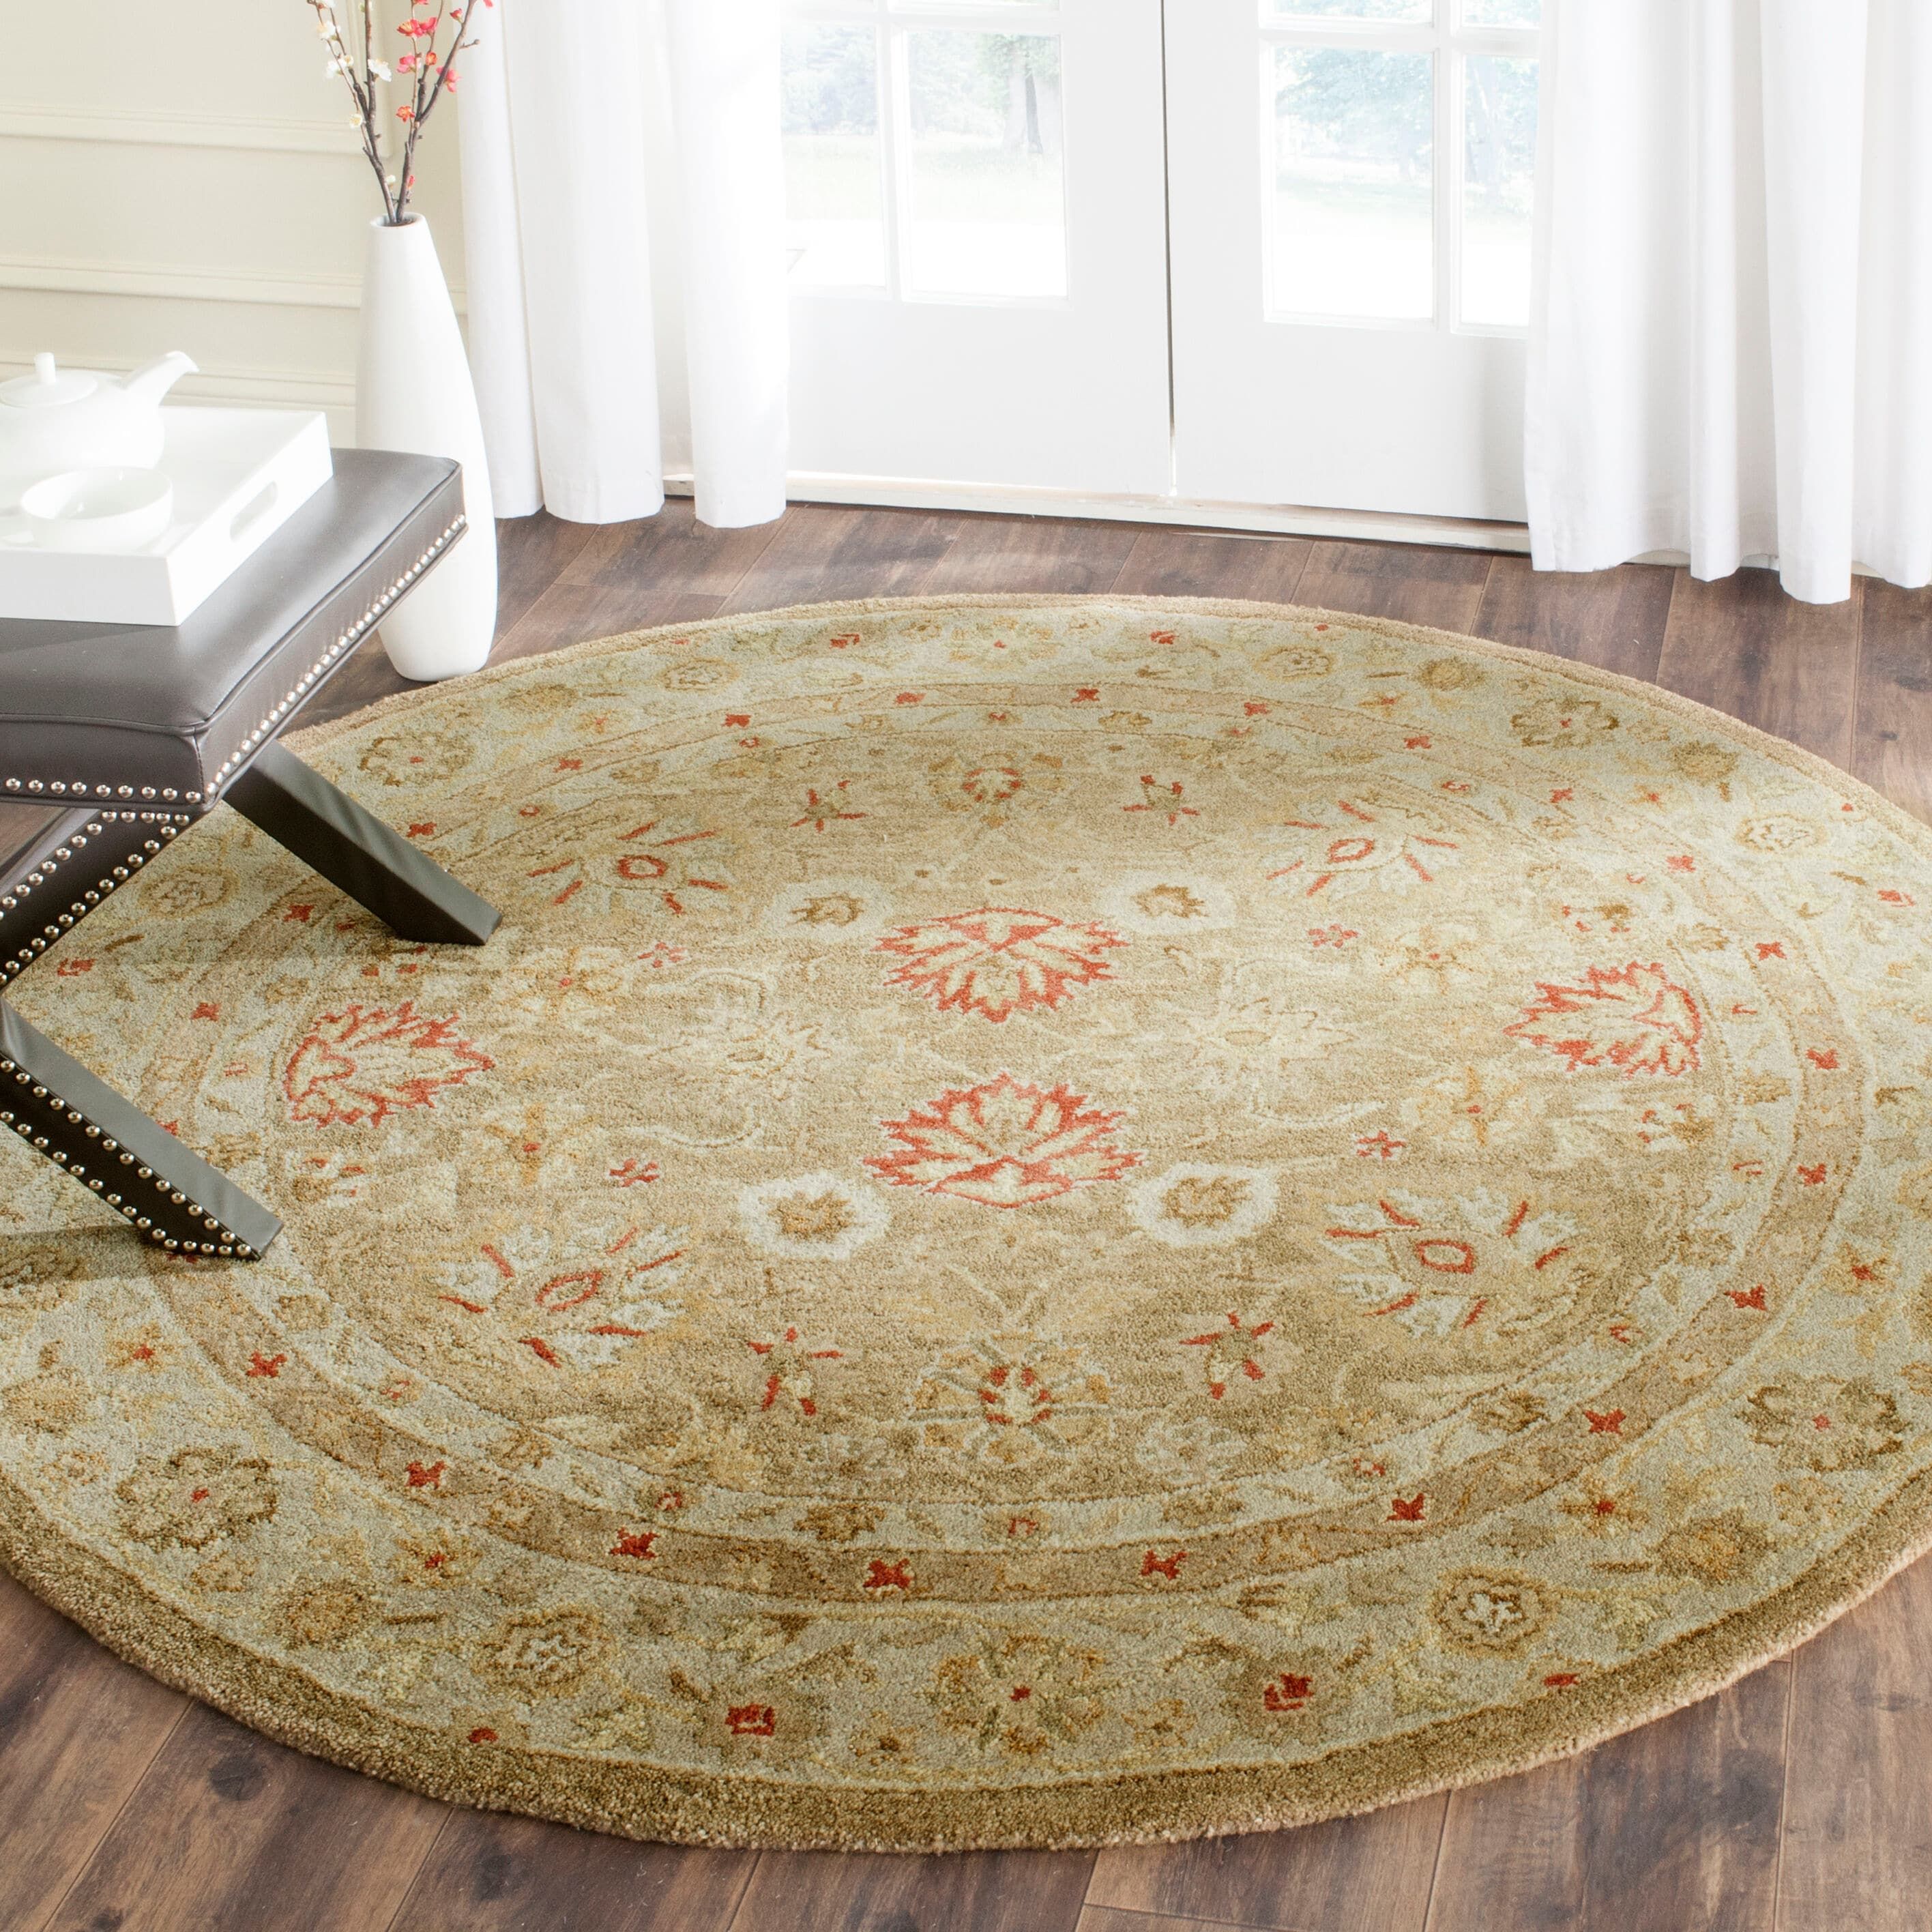 Safavieh 8 X 10 Wool Brown/Beige Oval Indoor Floral/Botanical Vintage Area  Rug In The Rugs Department At Lowes With Botanical Oval Rugs (View 13 of 15)